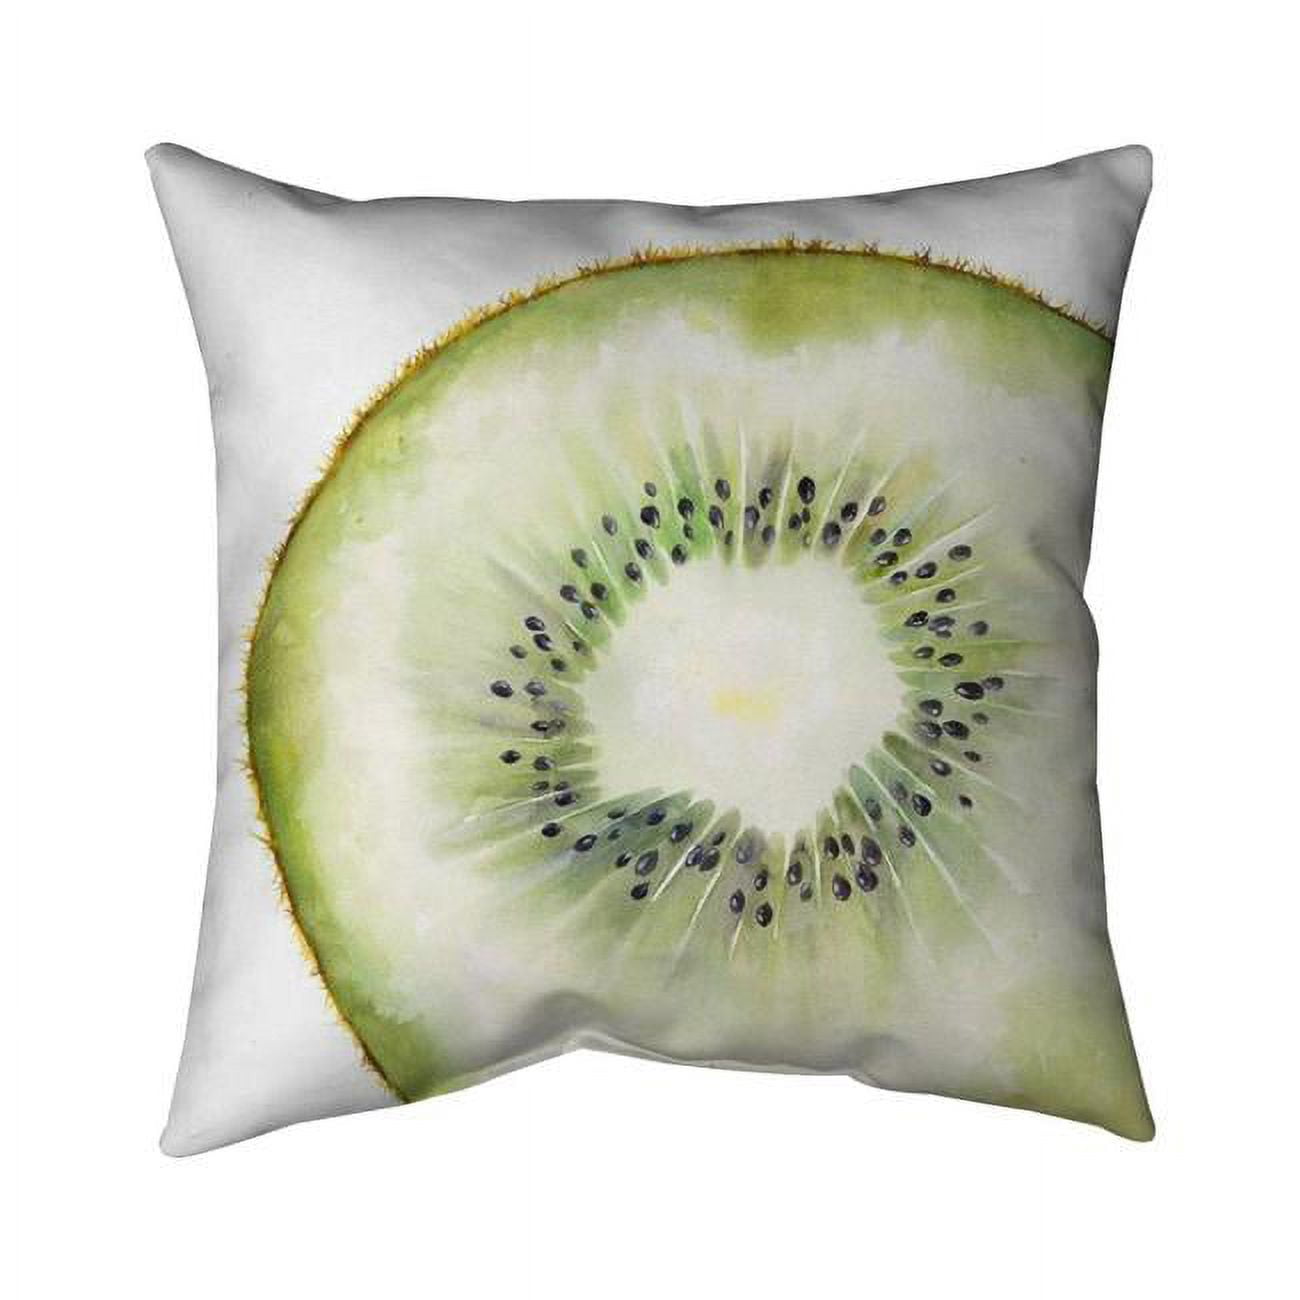 Begin Home Decor 5542-2020-GA74 20 x 20 in. Kiwi Slice-Double Sided Print Outdoor Pillow Cover